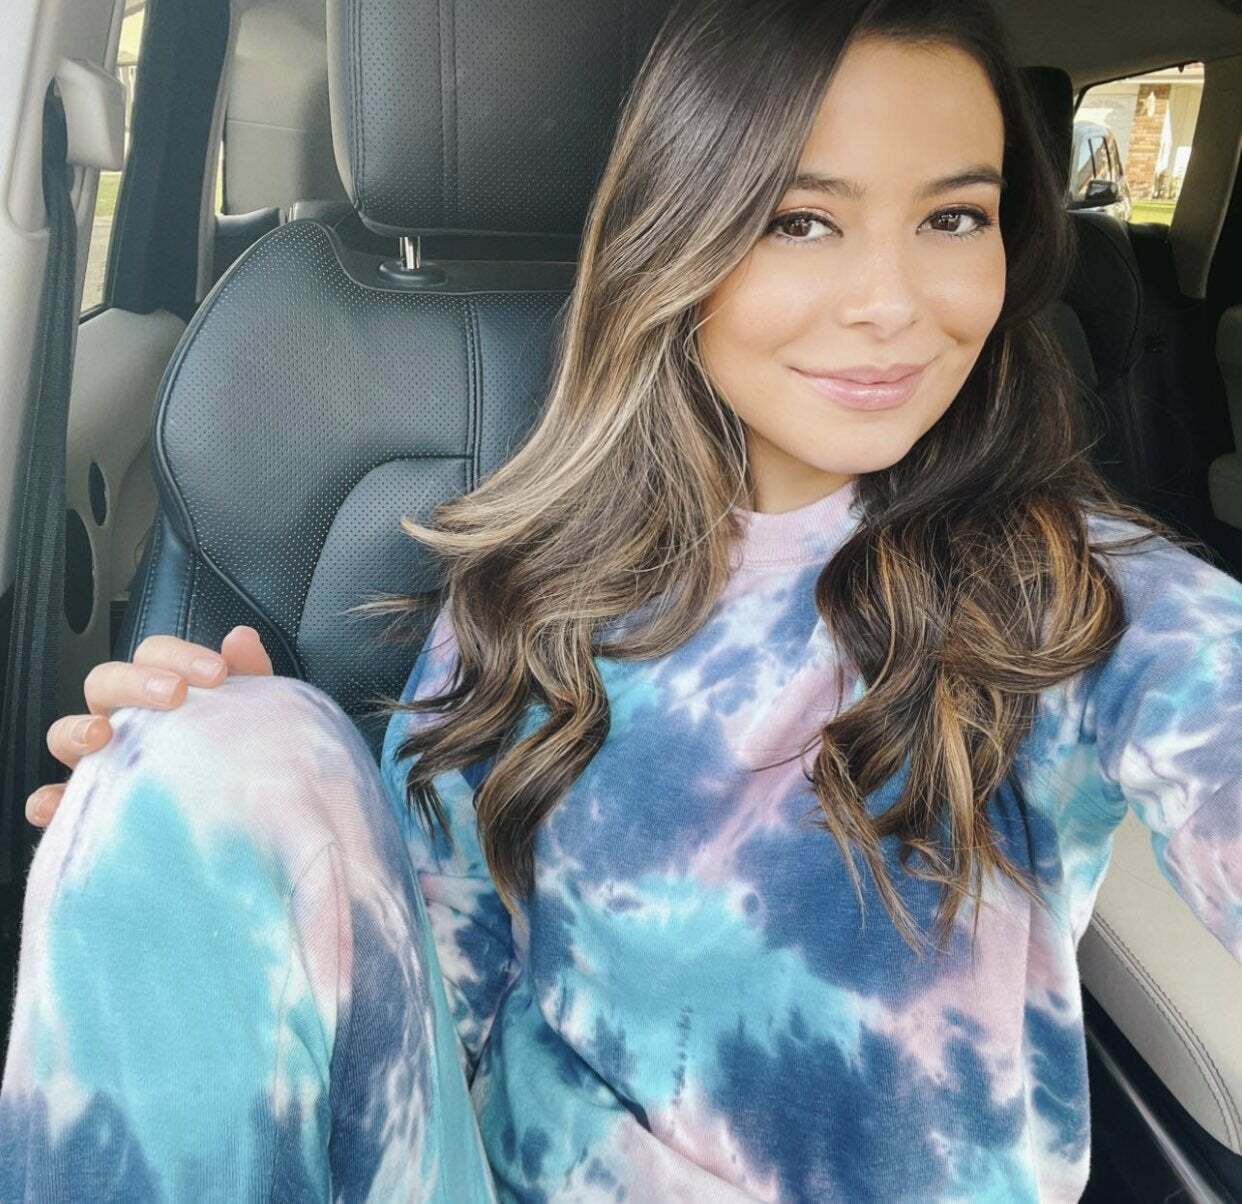 How many cocks can Miranda Cosgrove milk with her soft lips